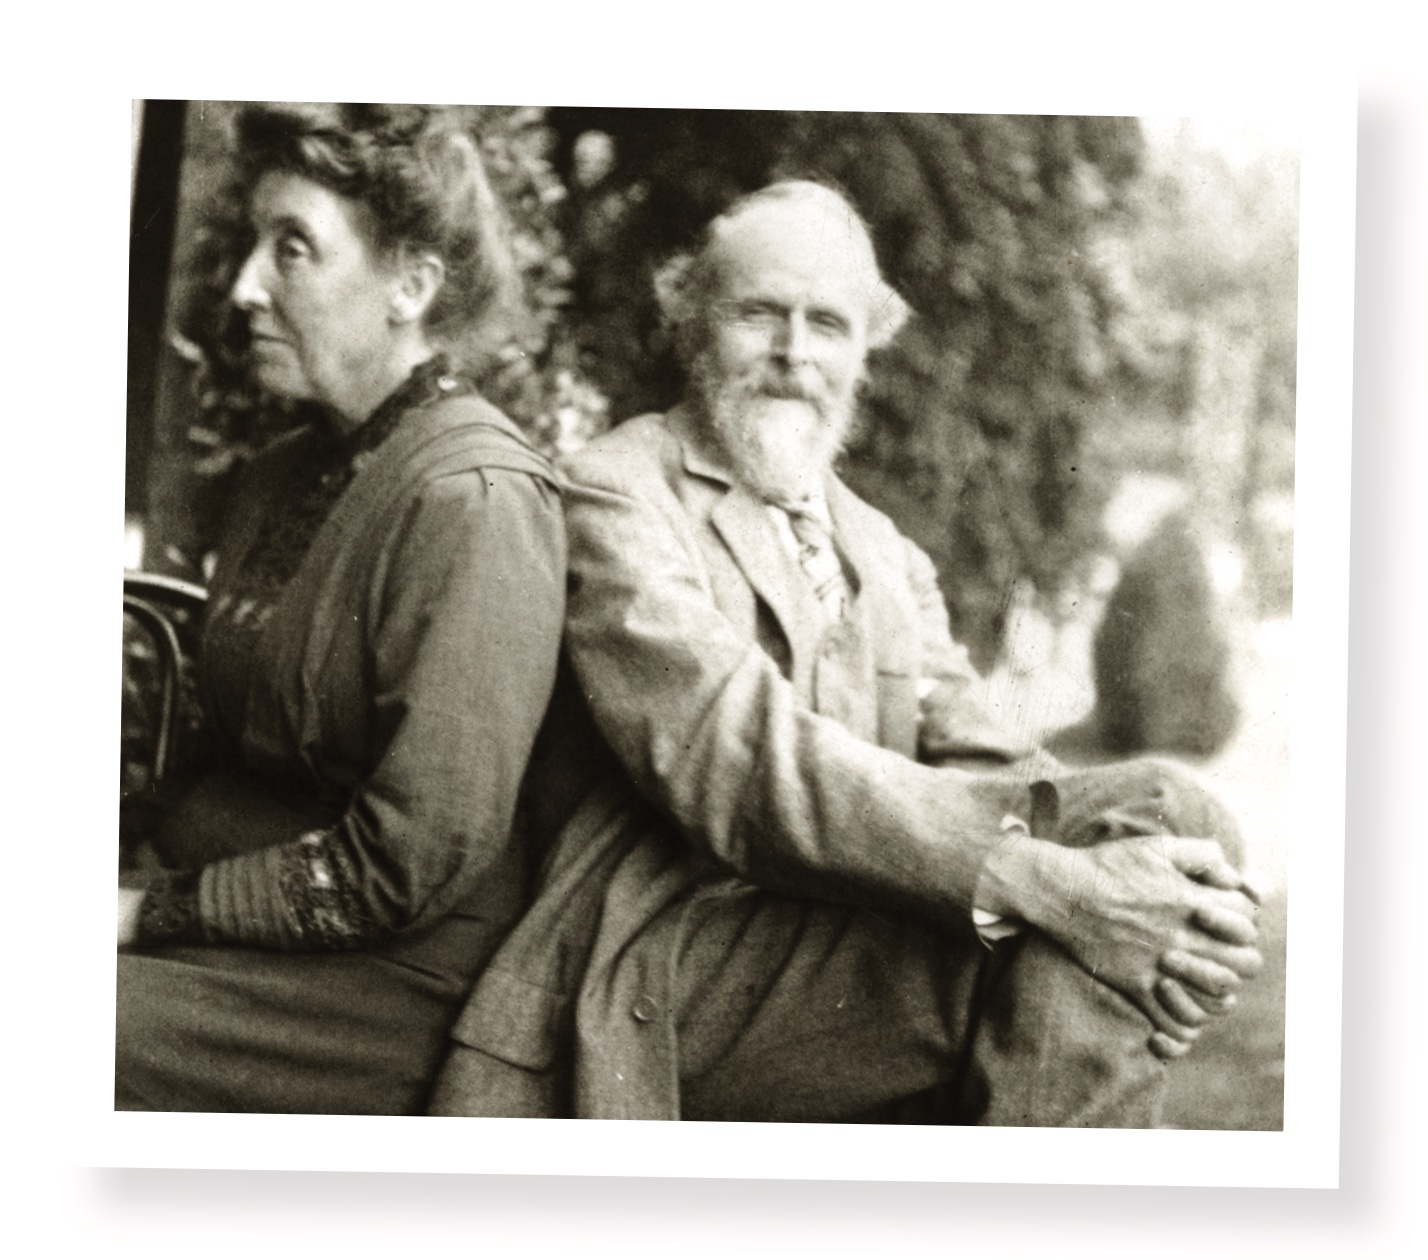 Evelyn De Morgan (1855-1919) with her husband William, c.1900